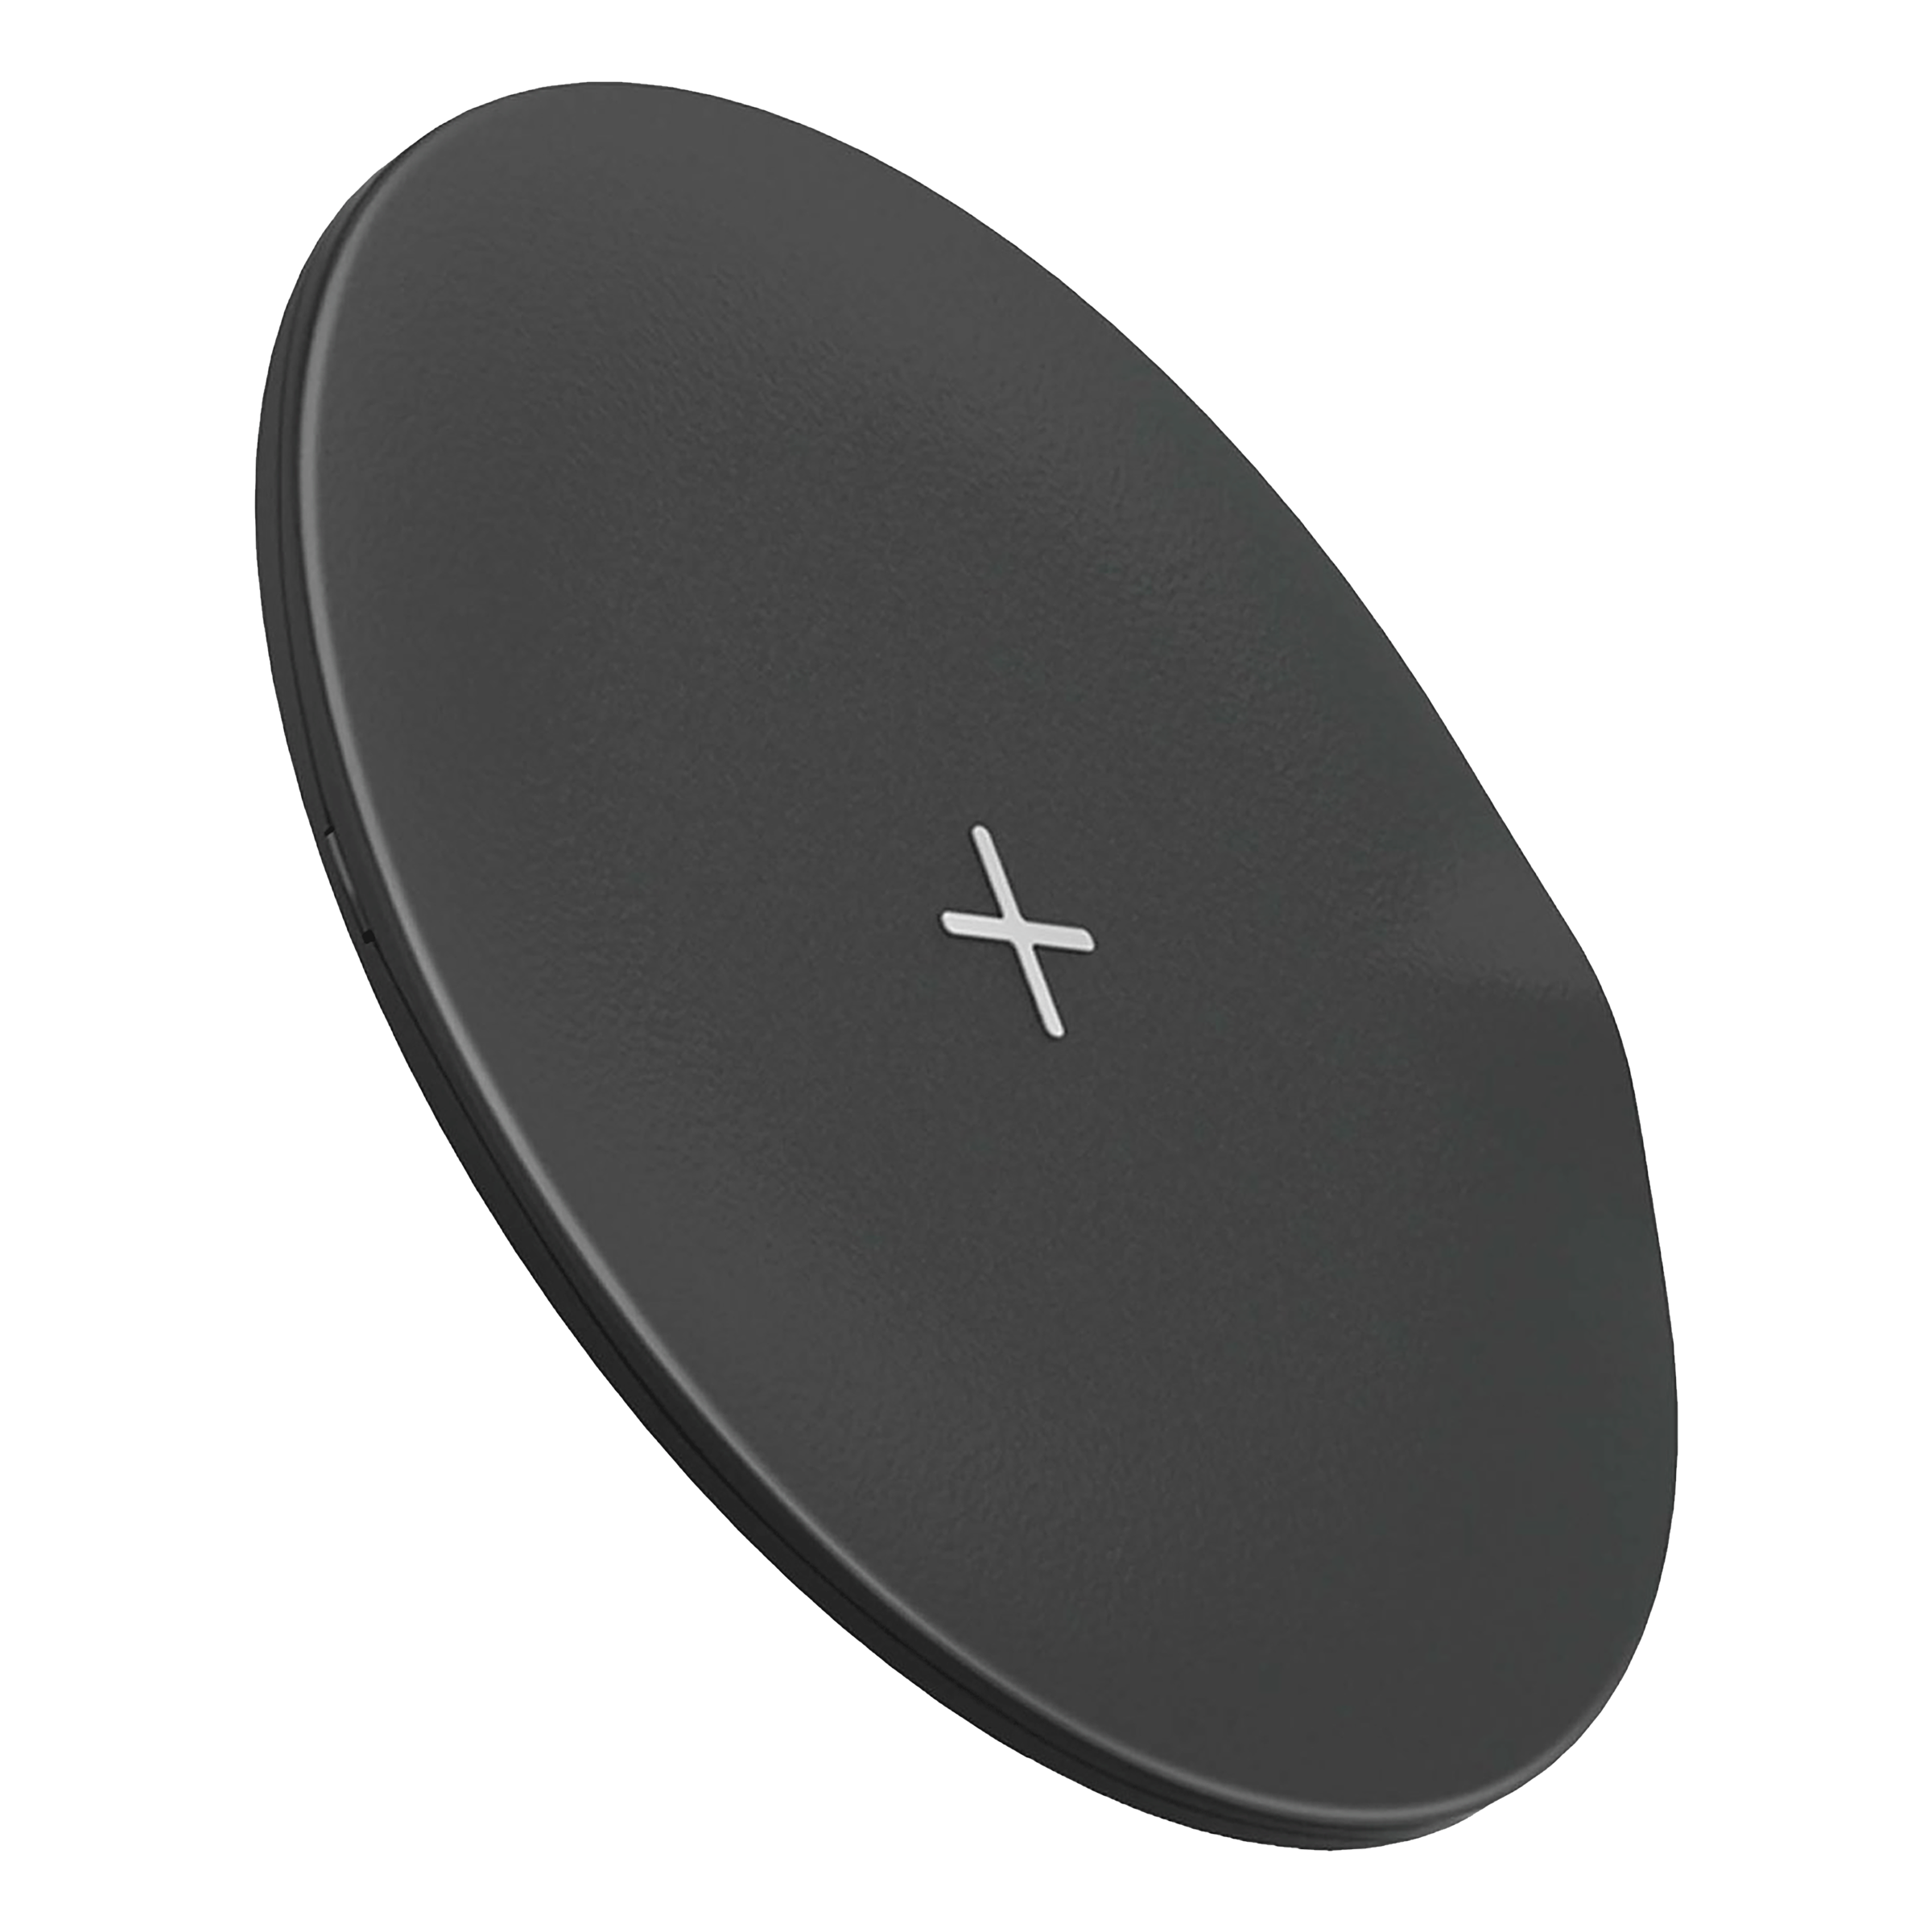 Stuffcool 15W Wireless Charger for iOS, Android (Qi Certified, Protect Against Short Circuit, Black)